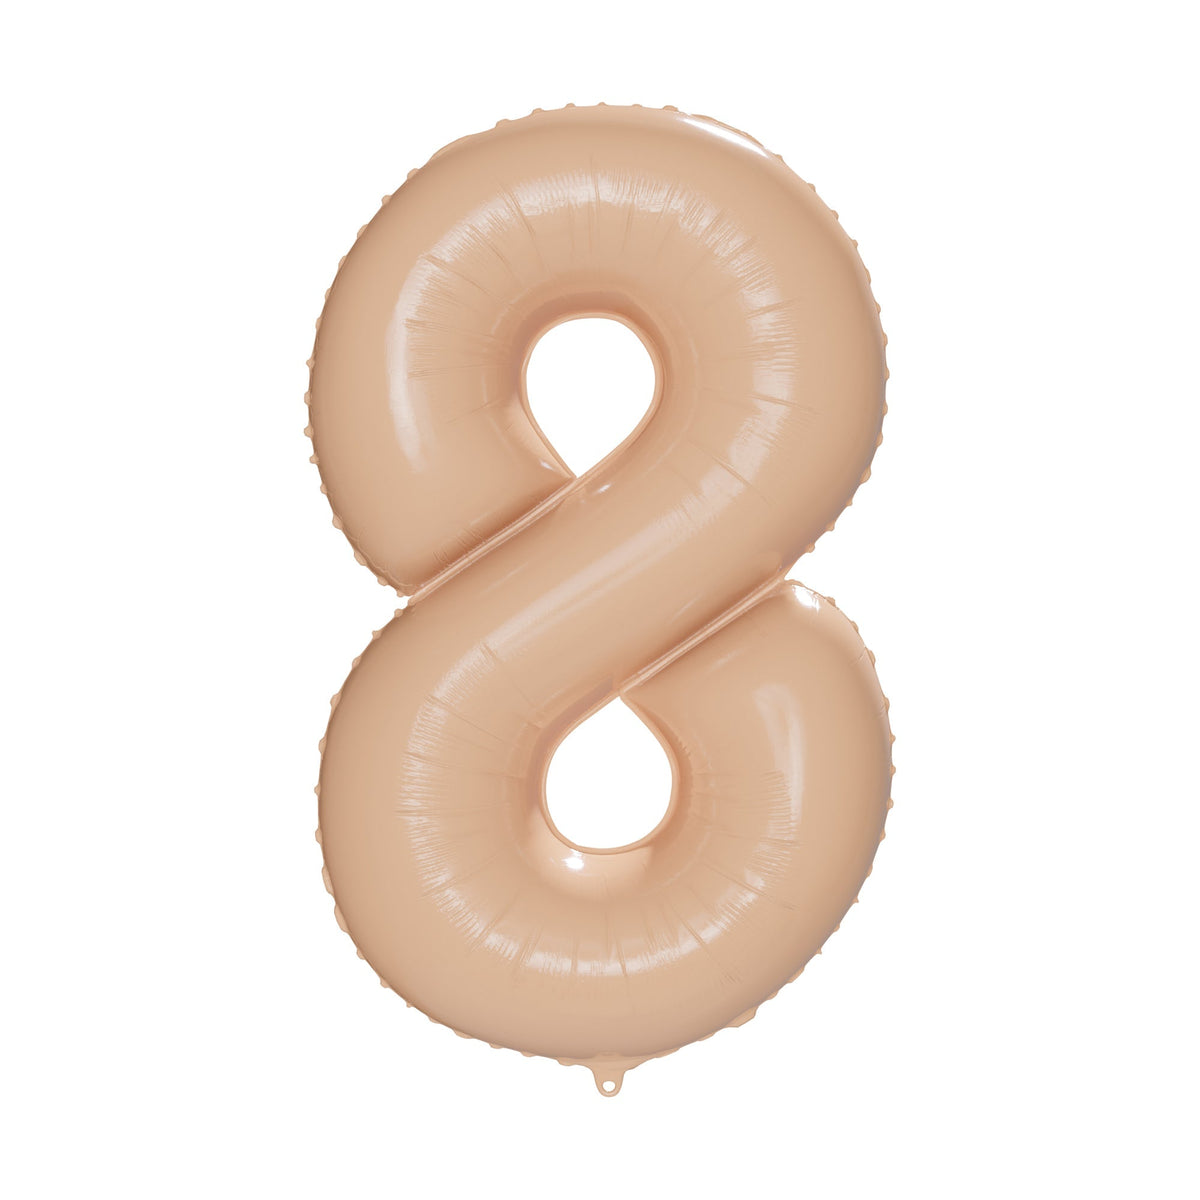 PARTYGRAM Balloons Blush Nude Number 8 Foil Balloon, Creamy Beige Matte Finish, Cappuccino, 34 Inches 810077658420